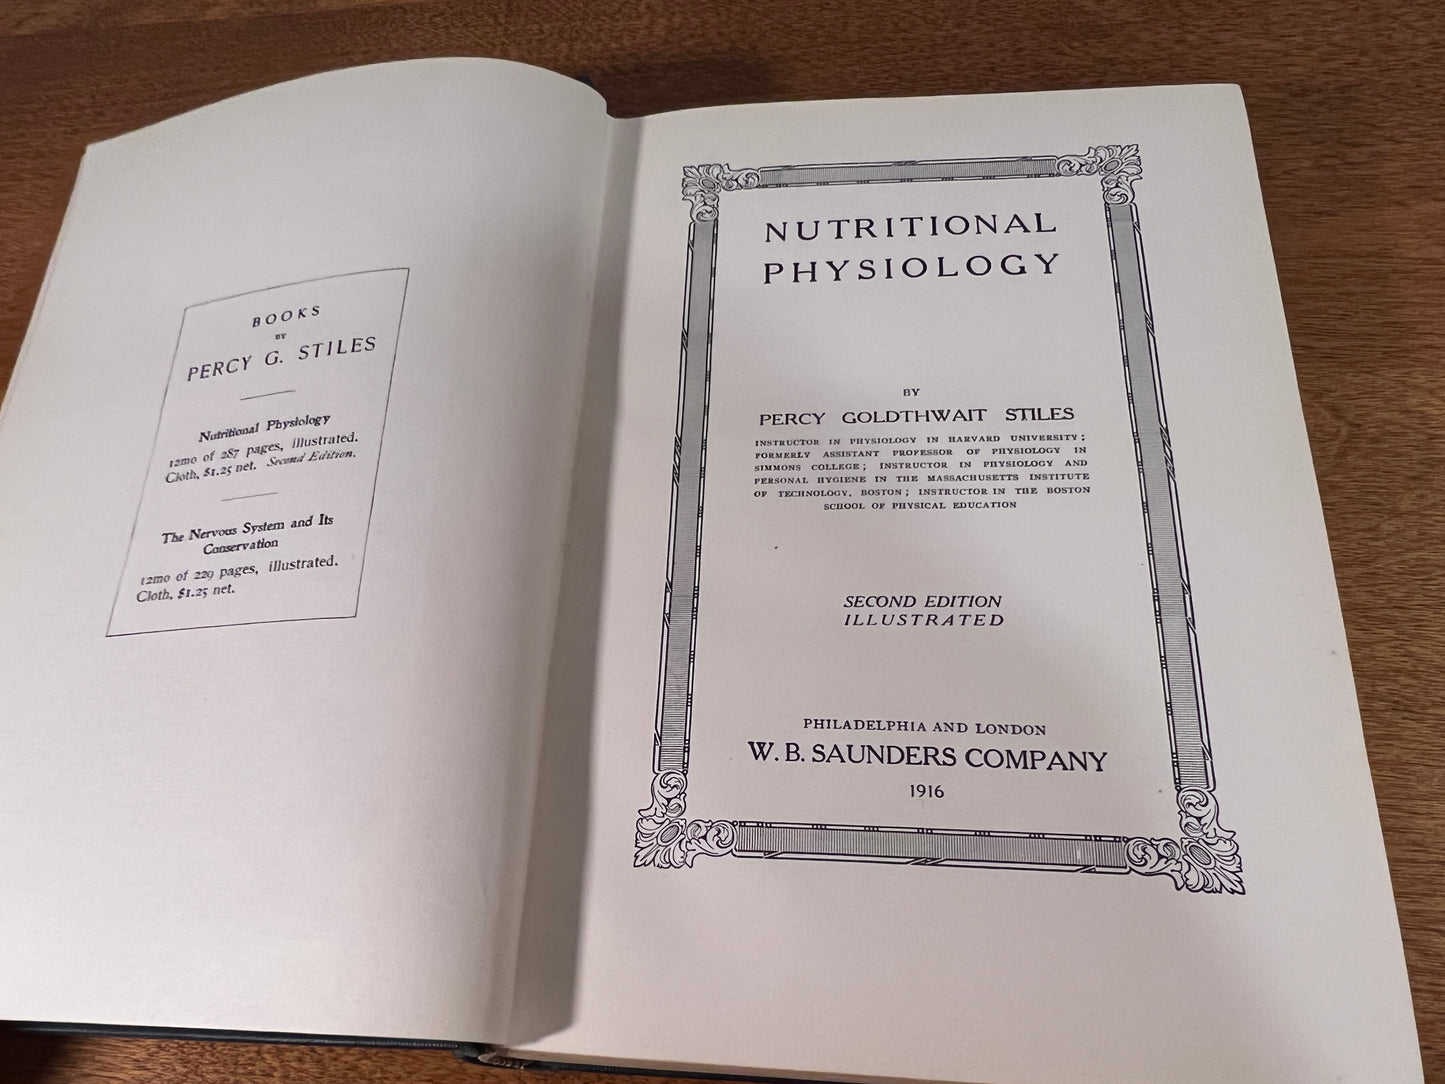 Nutritional Physiology by Percy Goldthwait Stiles [1916]